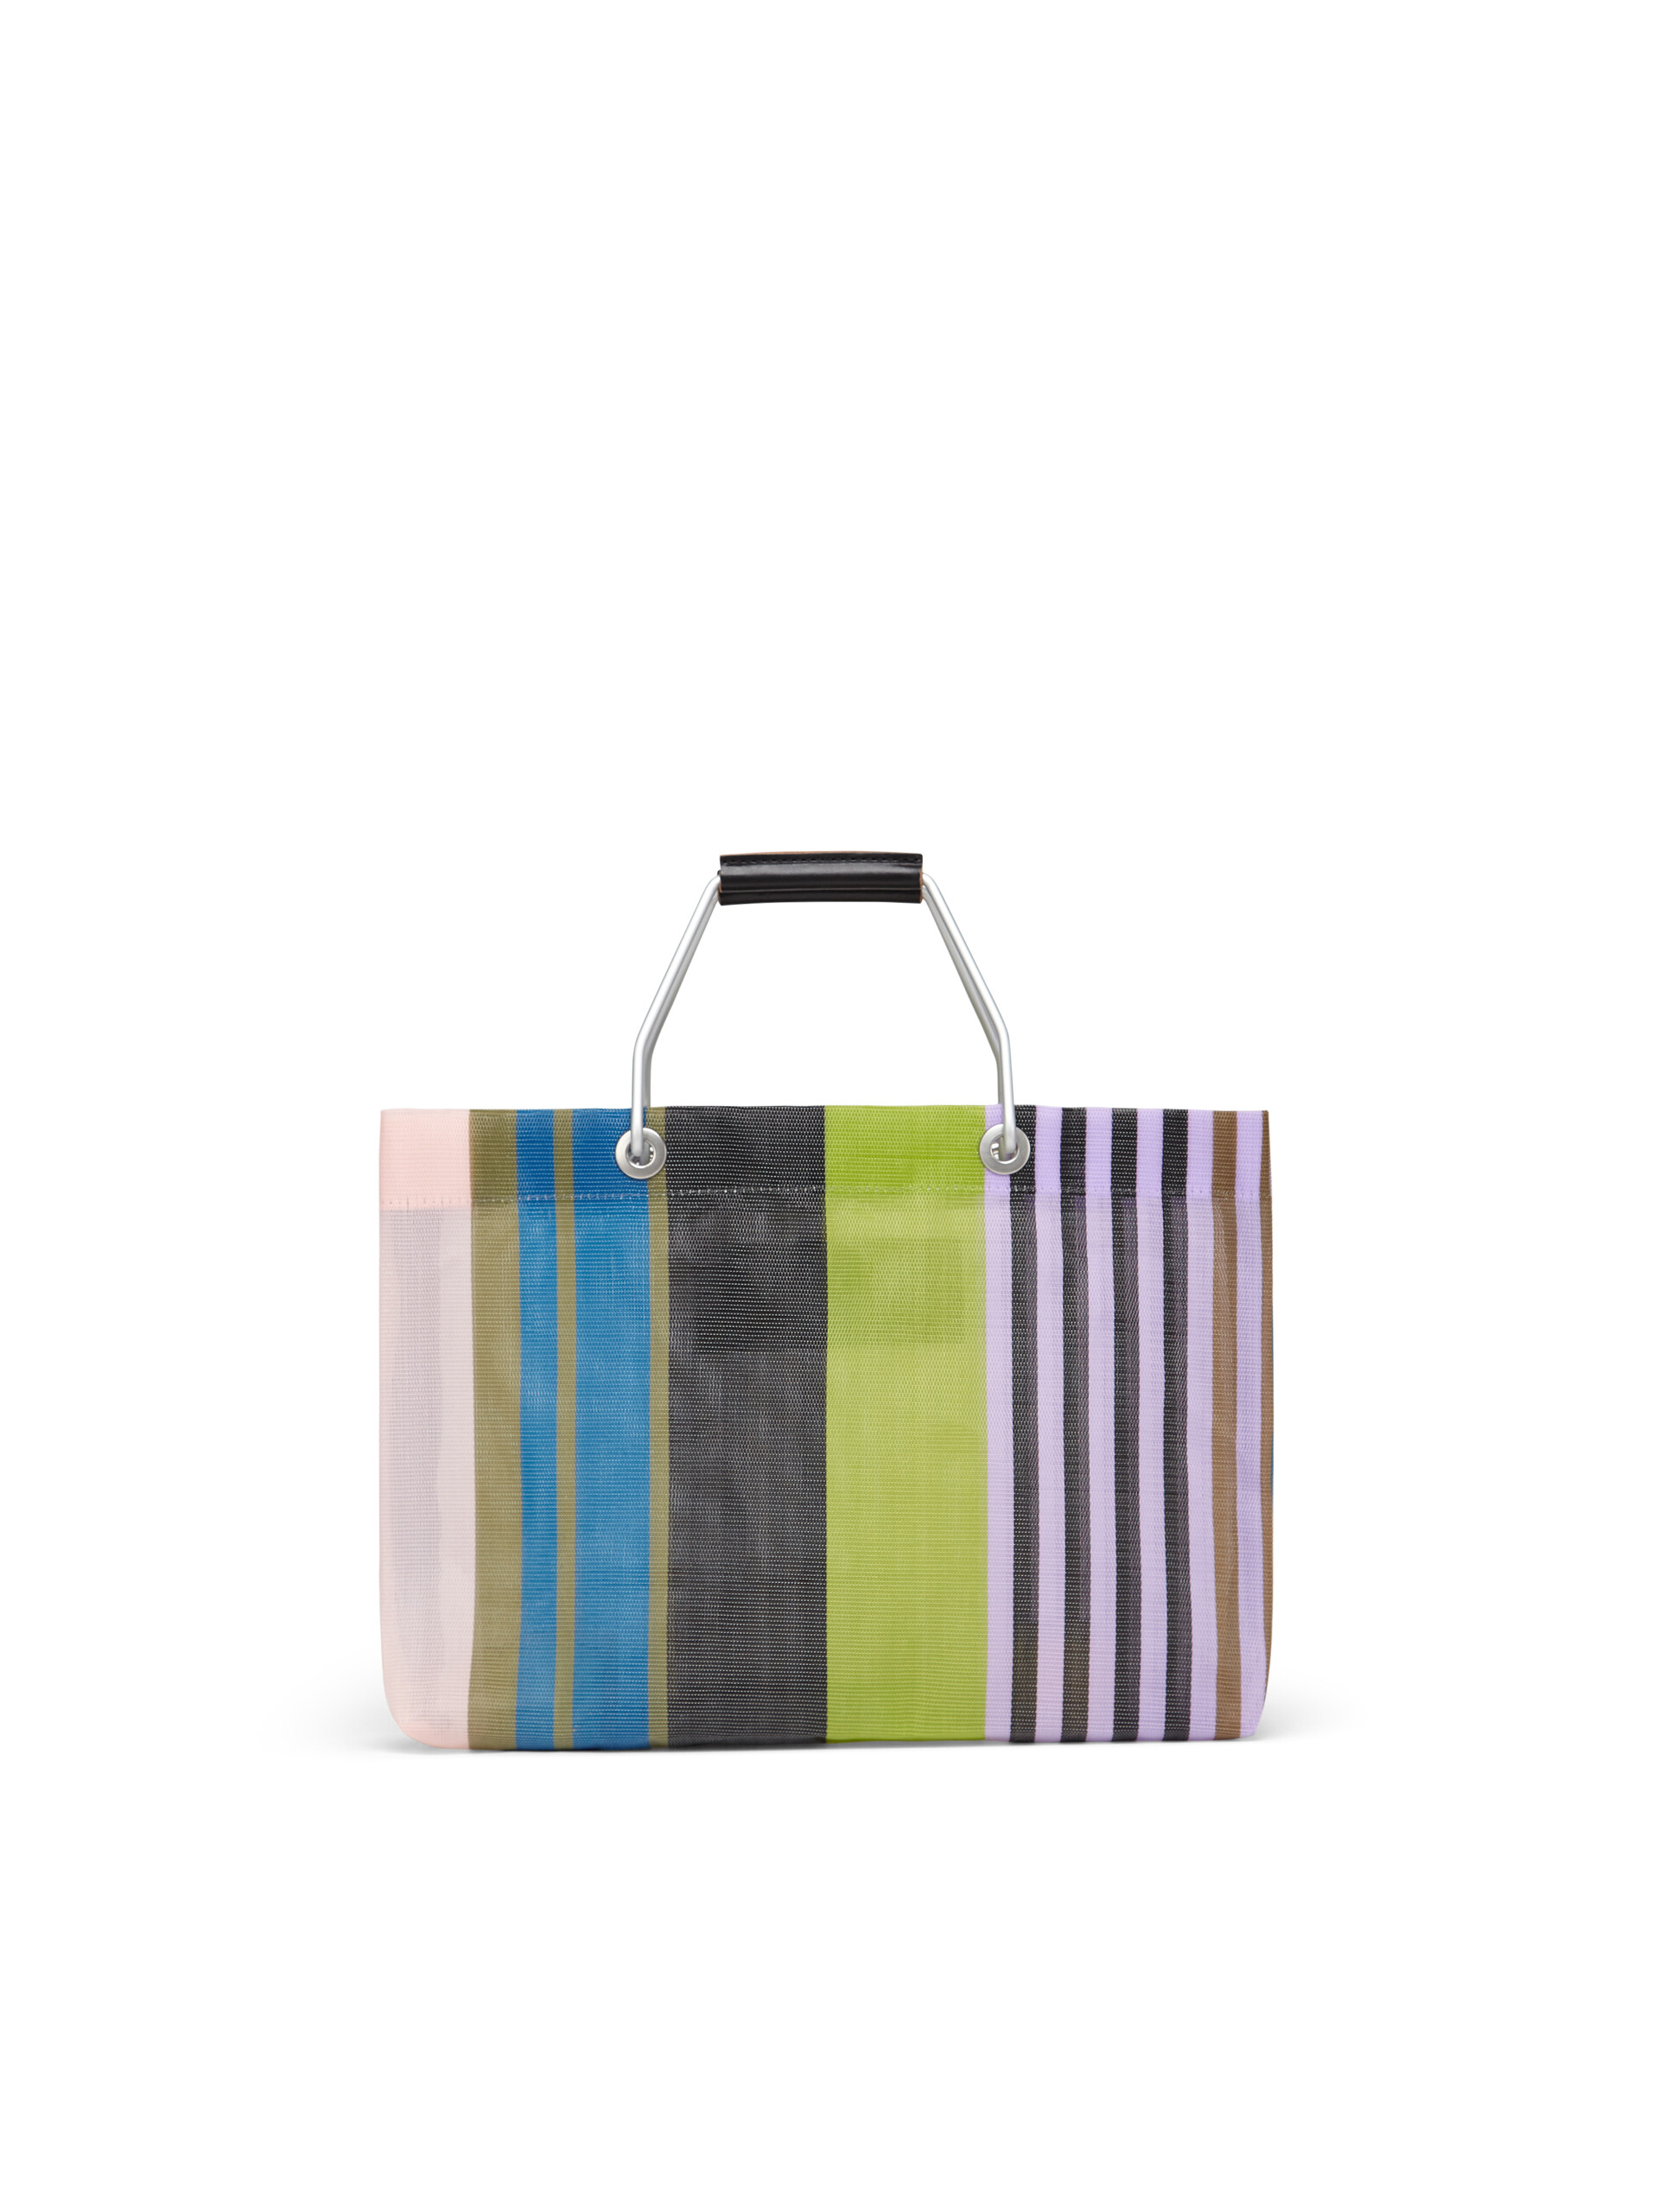 MARNI MARKET shopping bag in striped lilac, green, black, beige and blue polyamide - Bags - Image 3